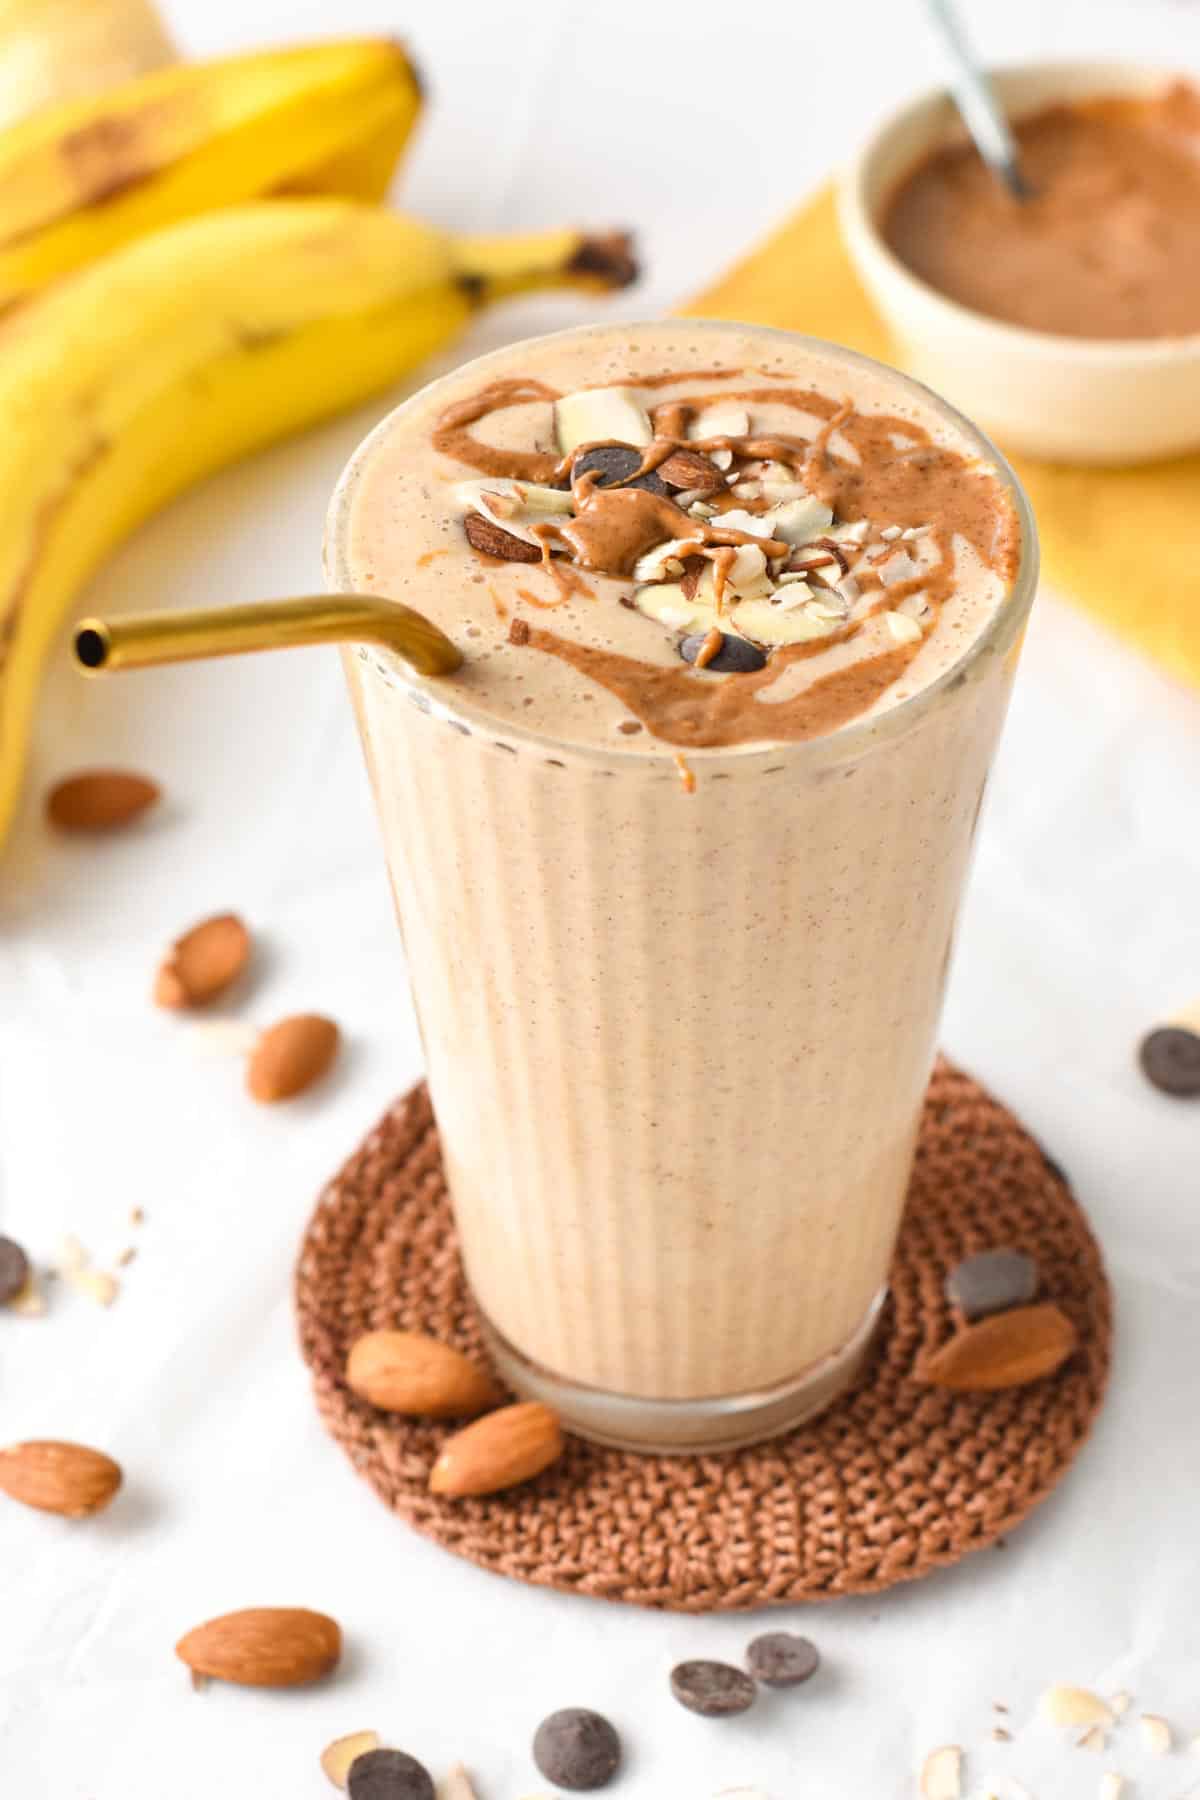 This Banana Almond Butter Smoothie is a thick, creamy banana smoothie with a delicious nutty flavor from almond butter.